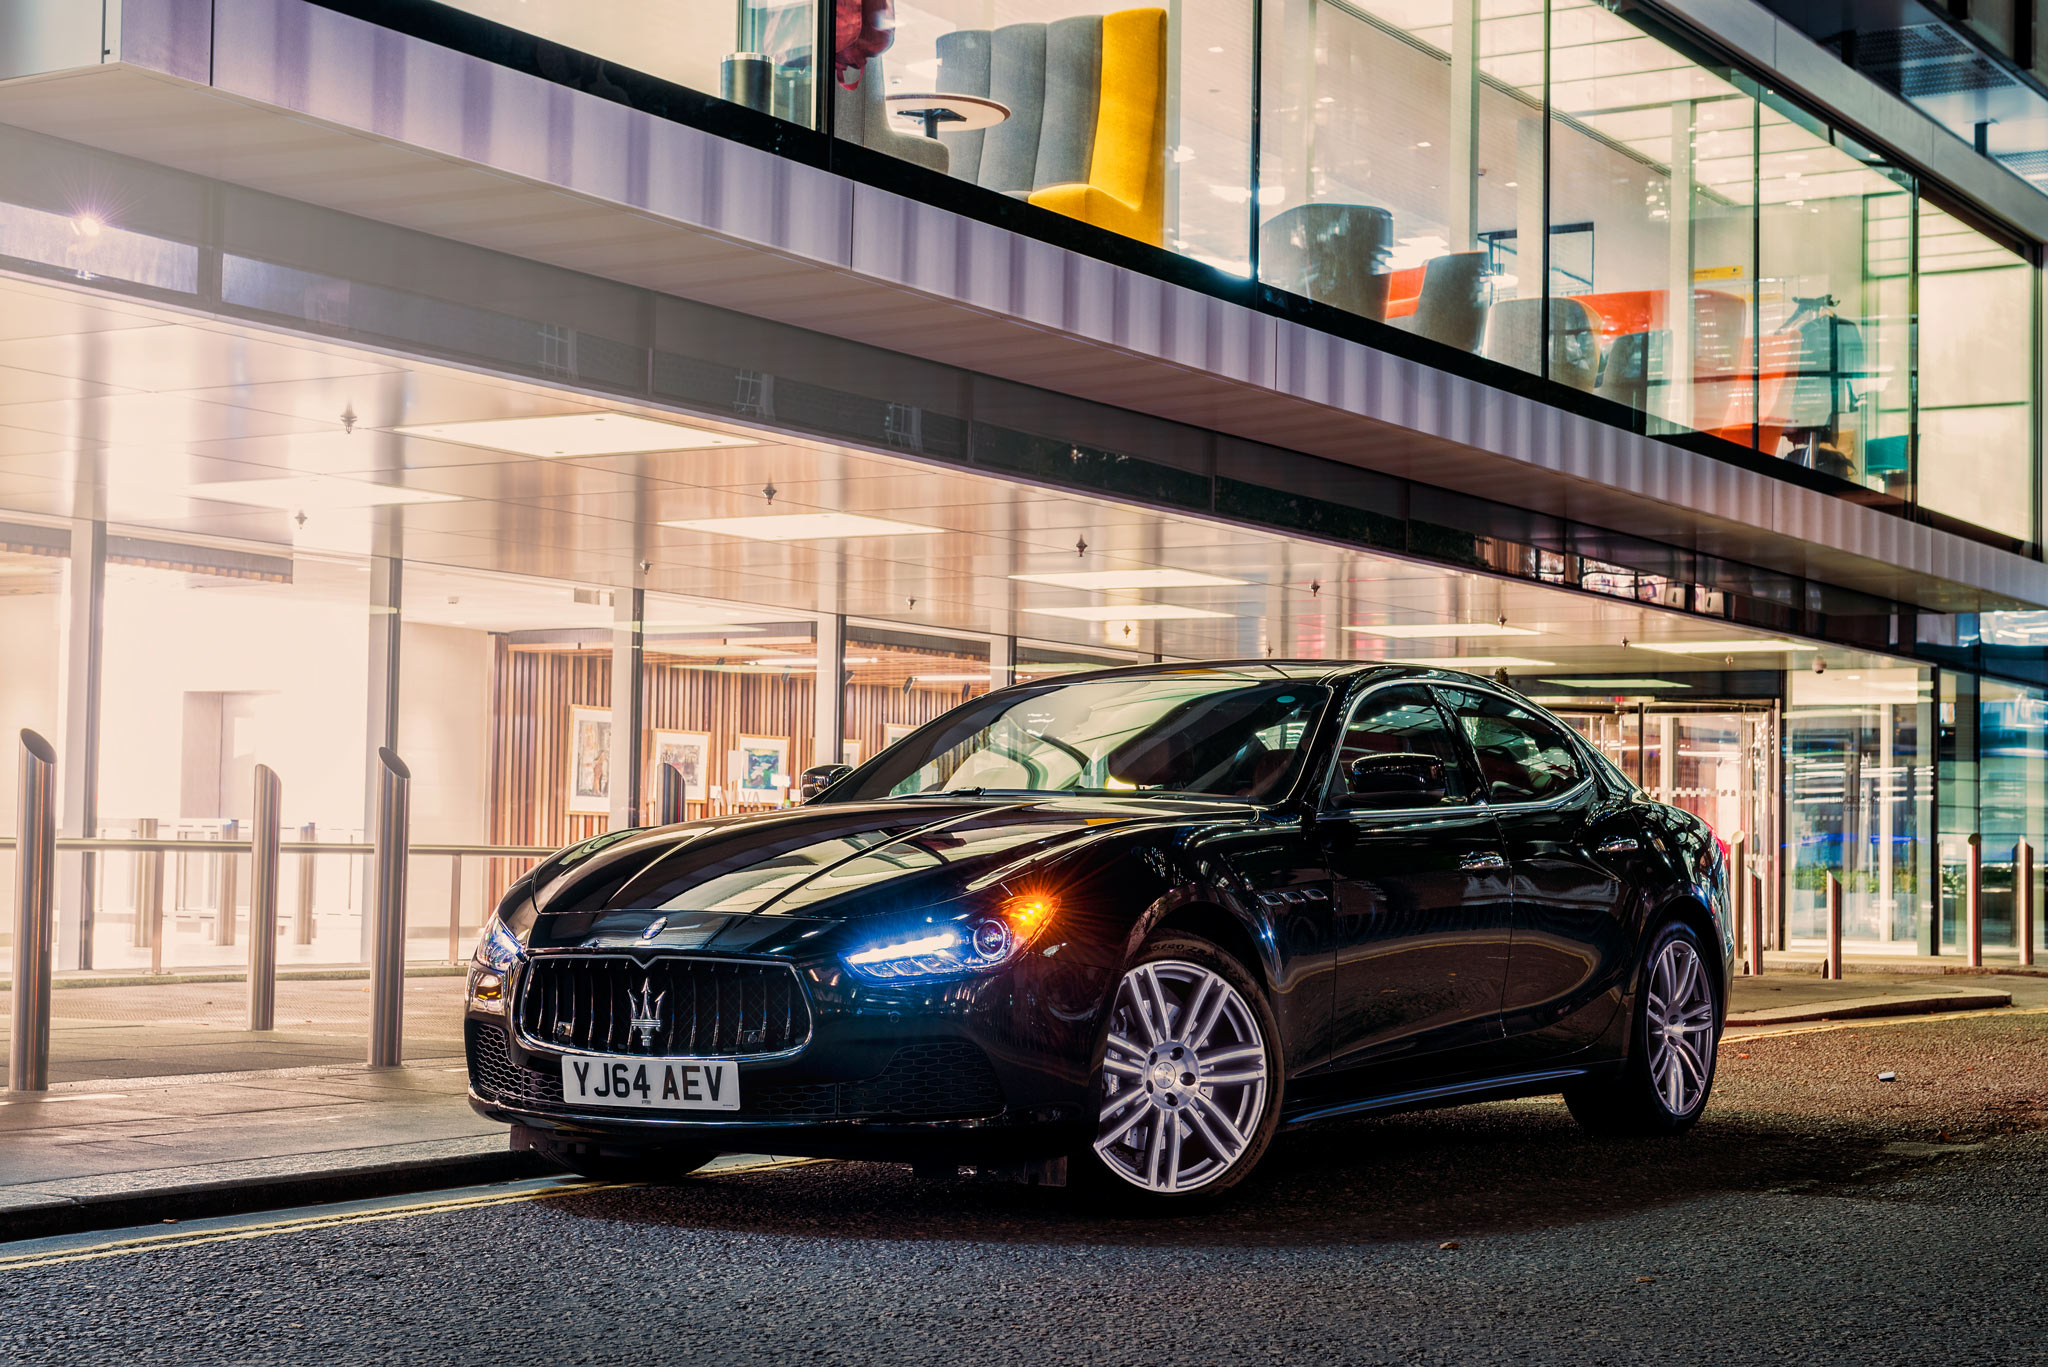 Maserati Ghibli parked up in the City of London